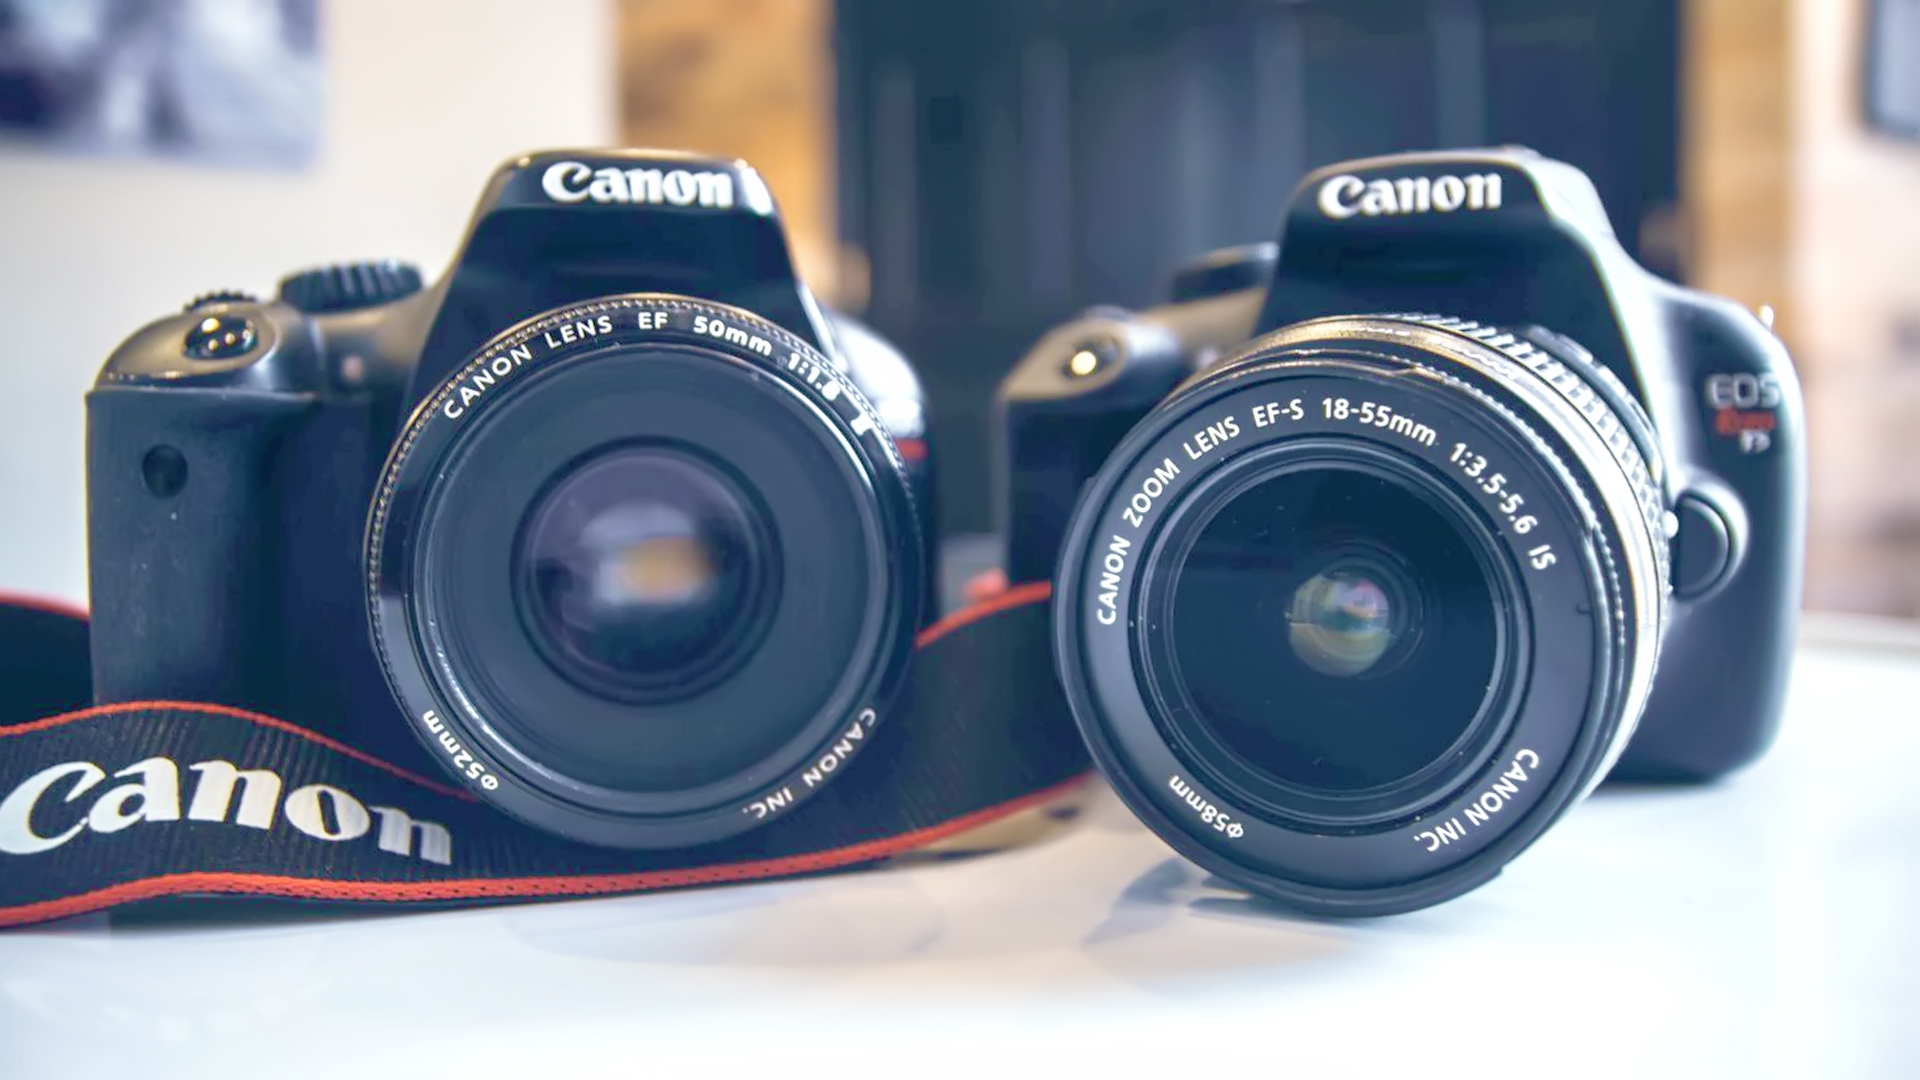 Mirrorless Cameras Vs DSLRs: The Differences And The Benefits